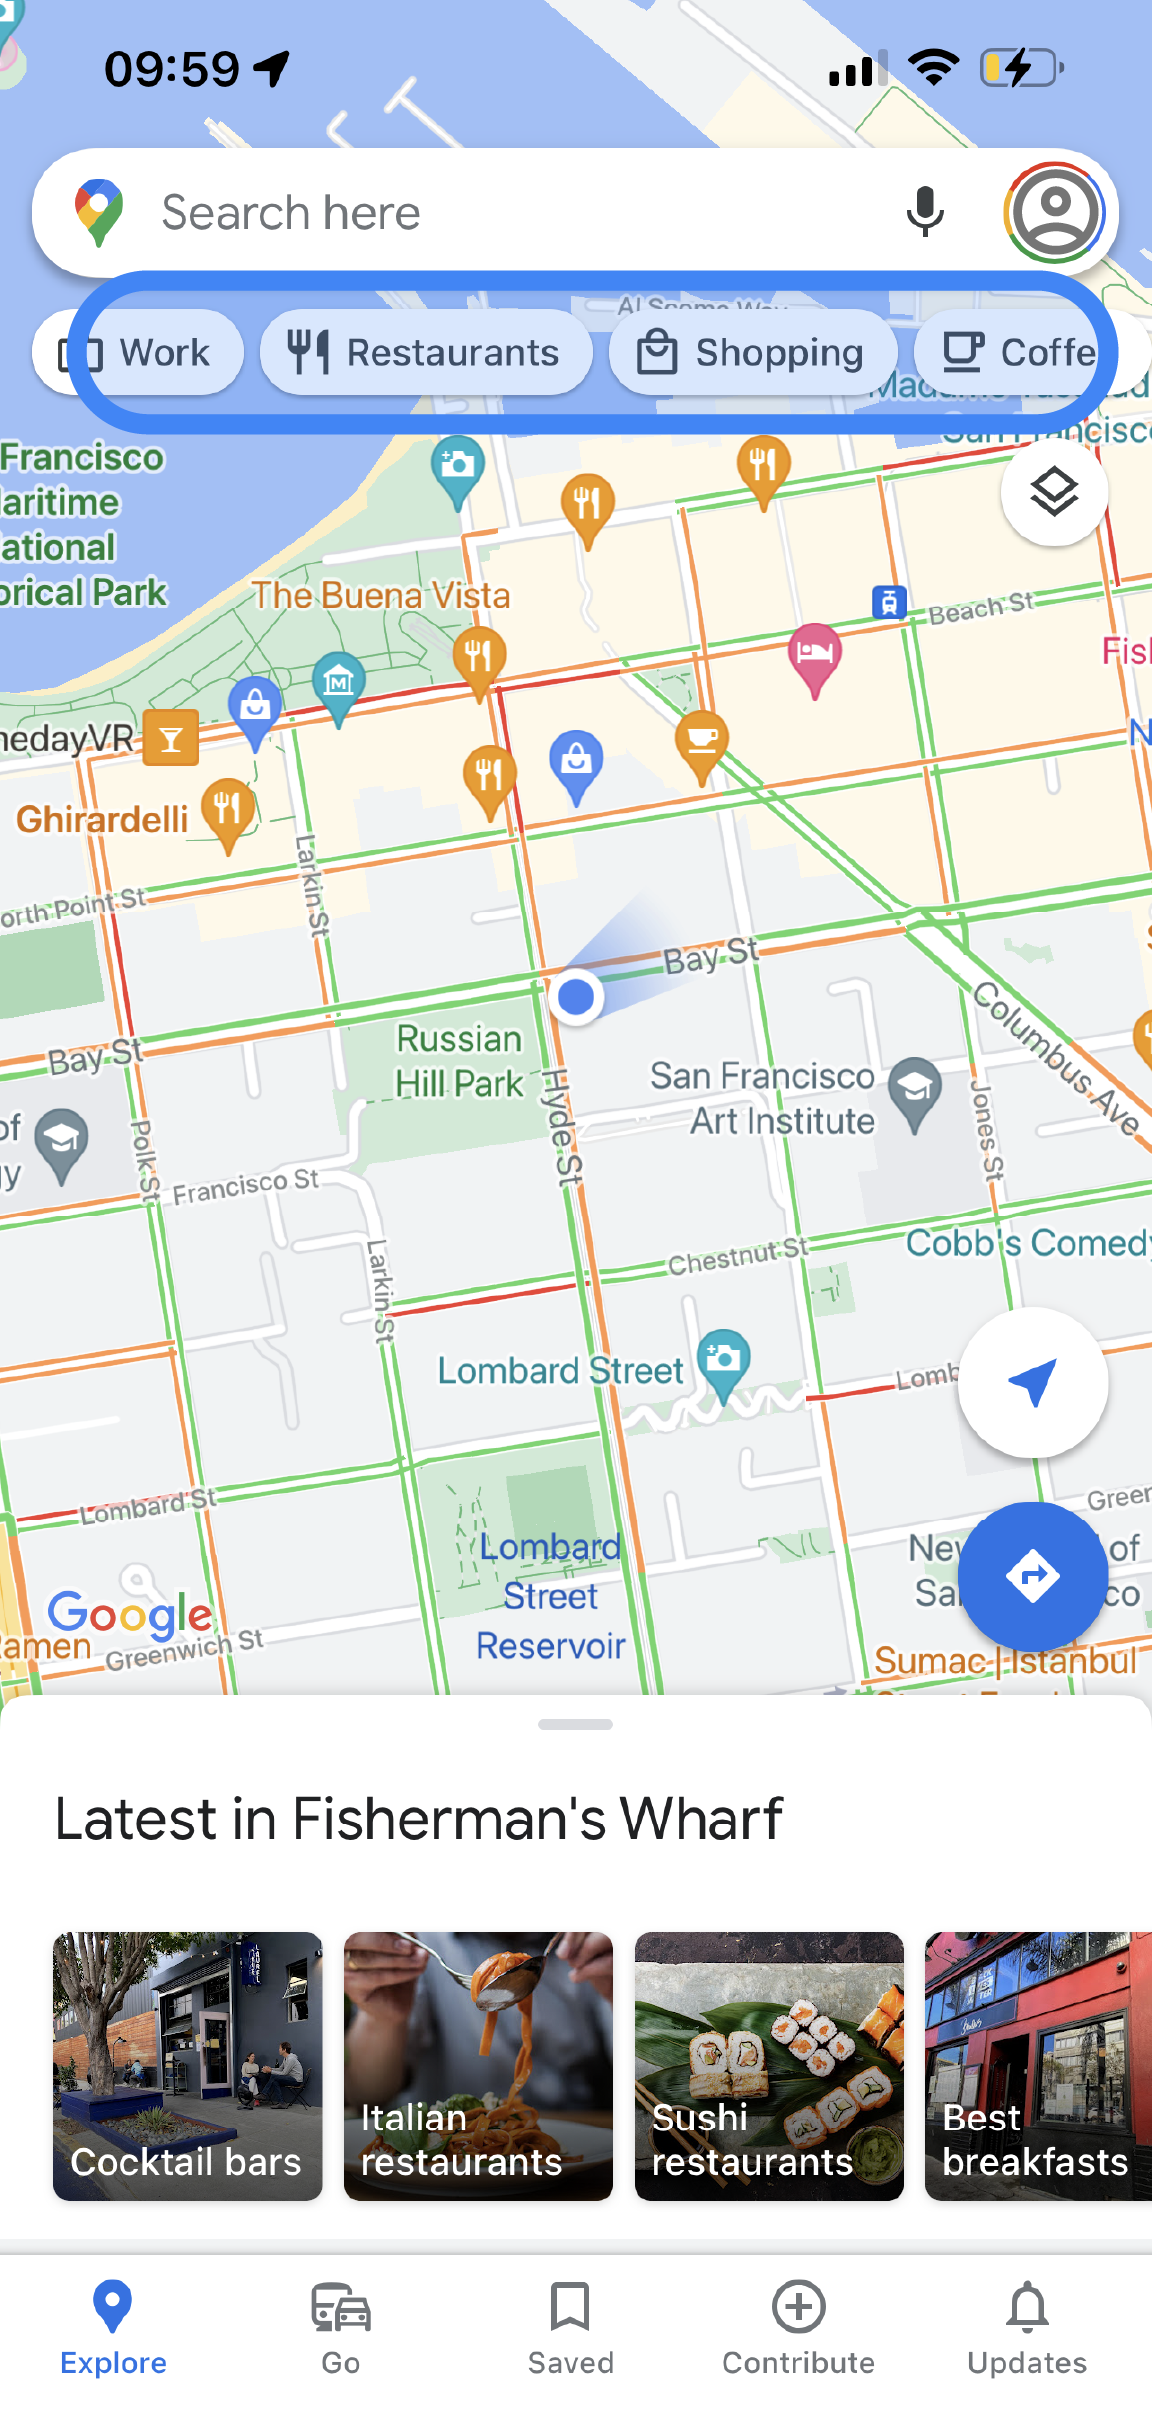 The Google Maps app displays a map of an area. There are tabs under the search bar that read "Work," "Restaurants," "Coffee," and "Parking."